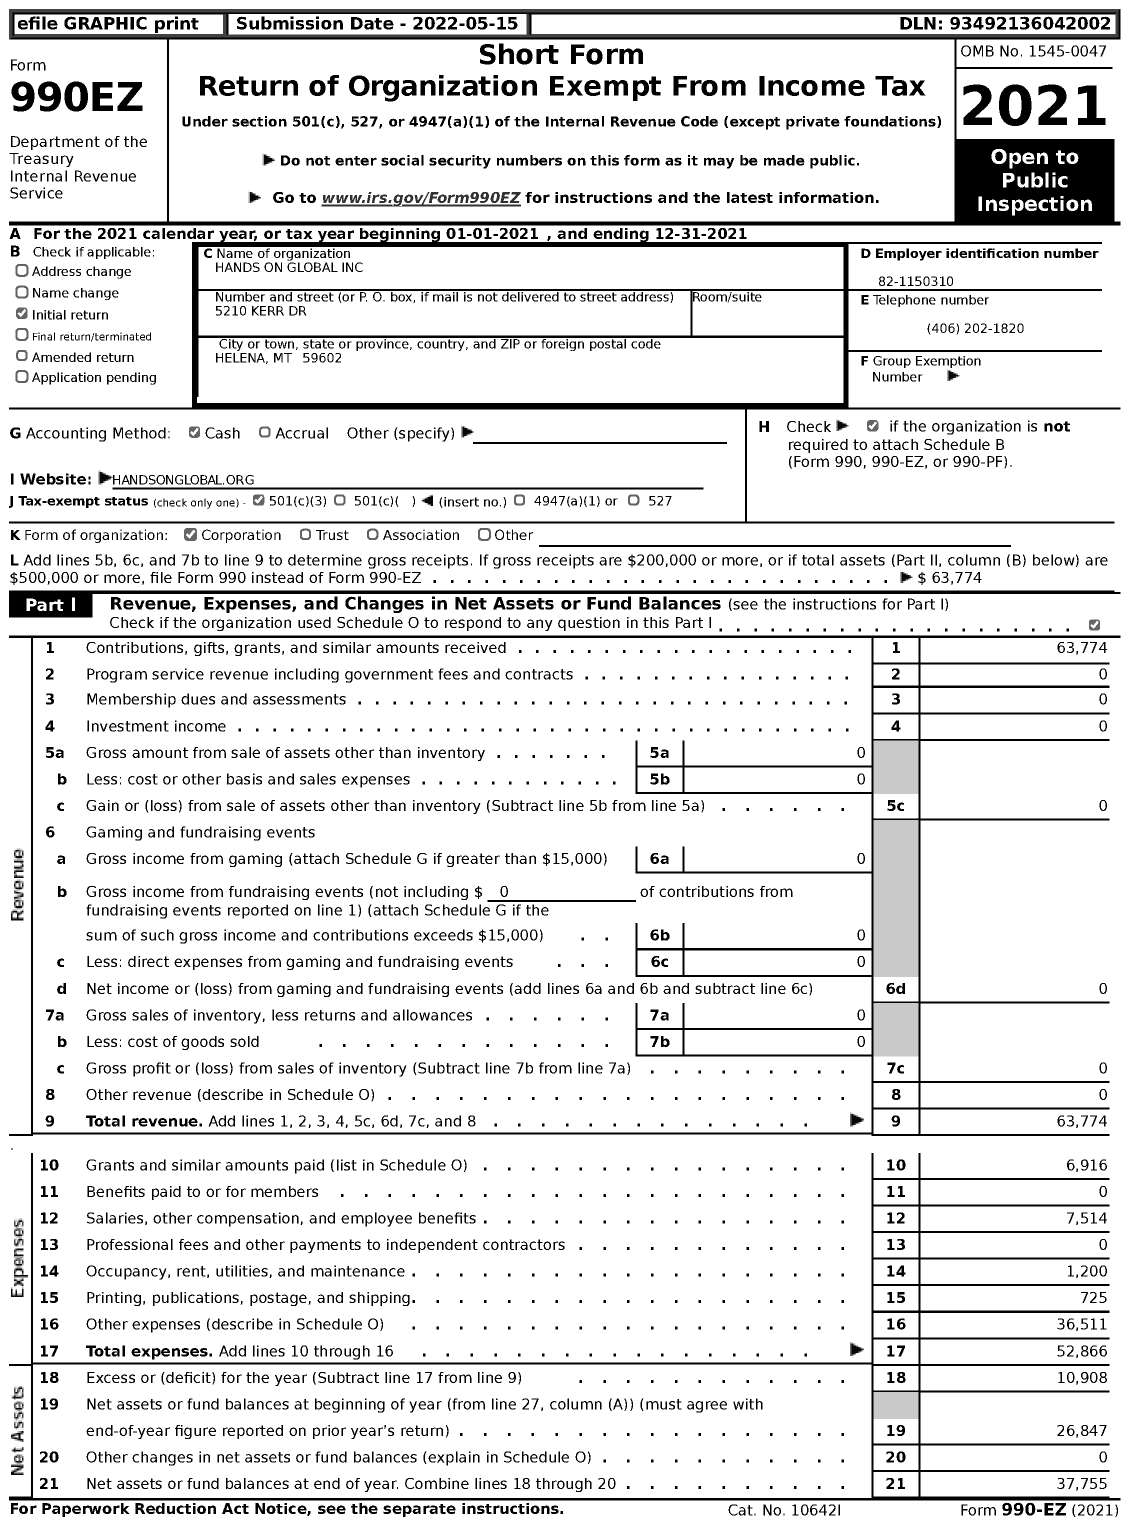 Image of first page of 2021 Form 990EZ for Hands on Global